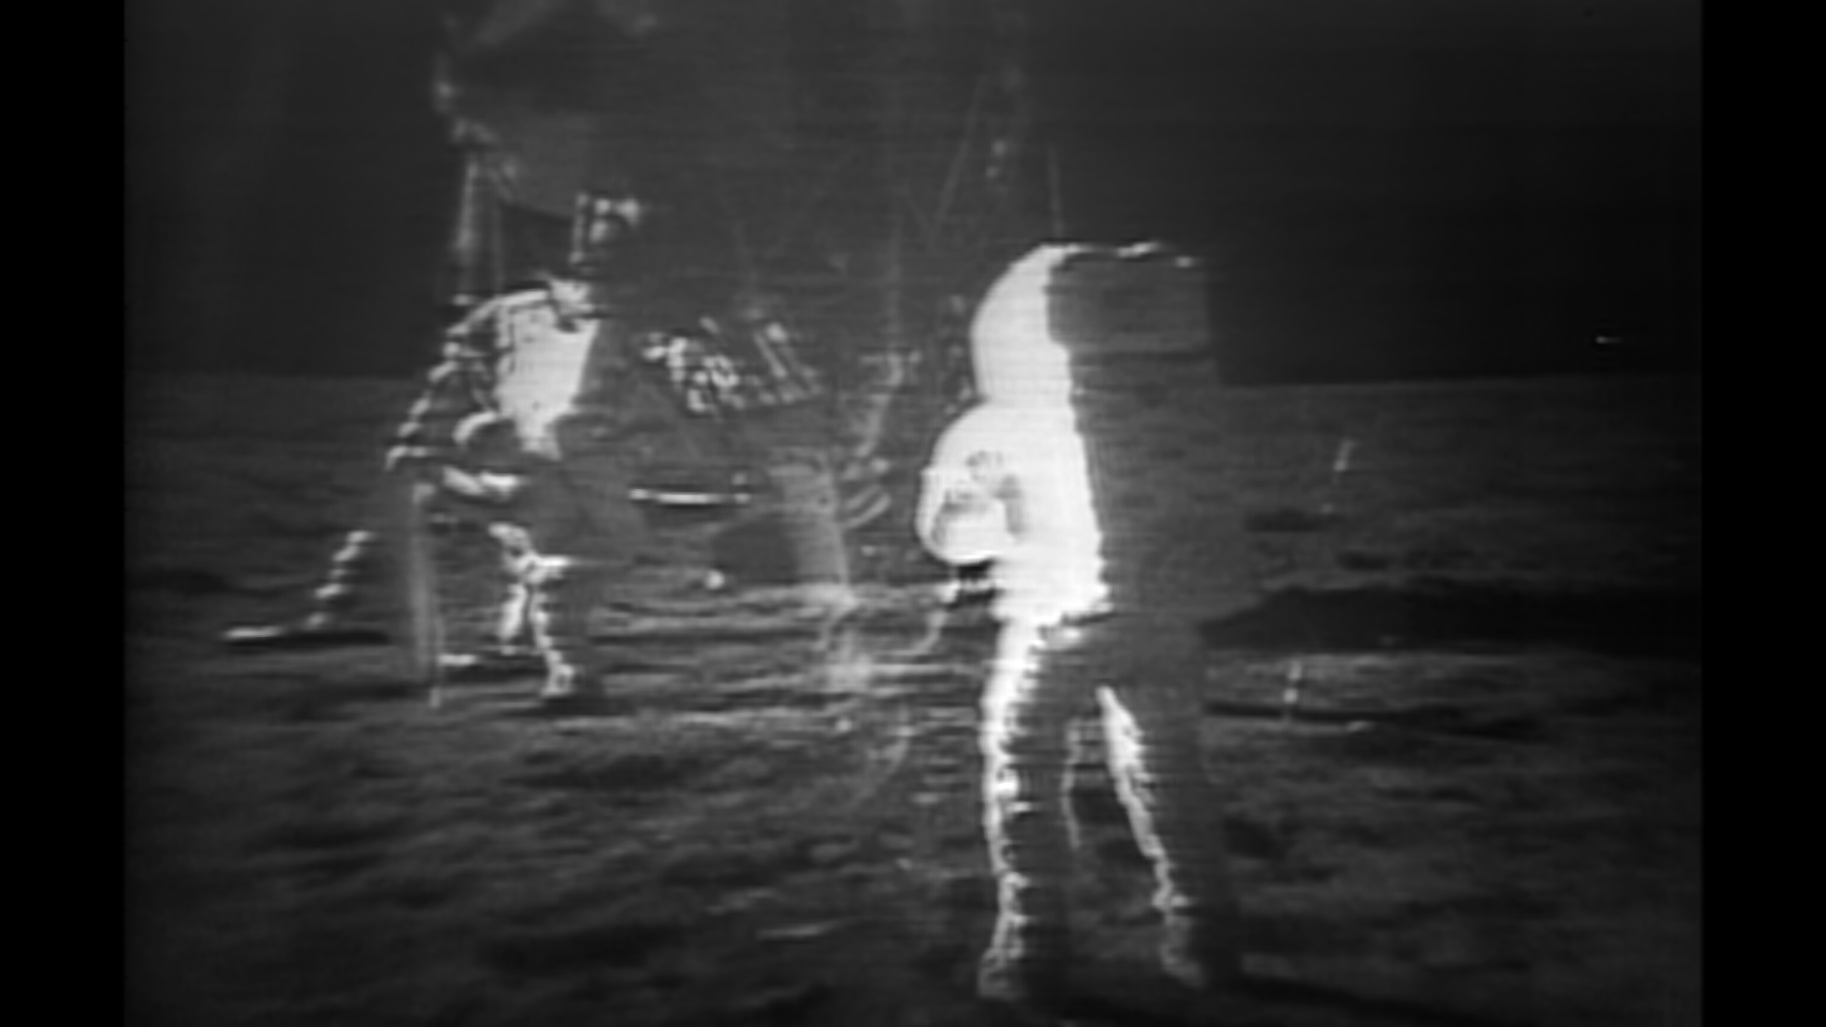 NASA Addresses Controversy Over 'Lost Tapes' of Apollo 11 Moonwalk